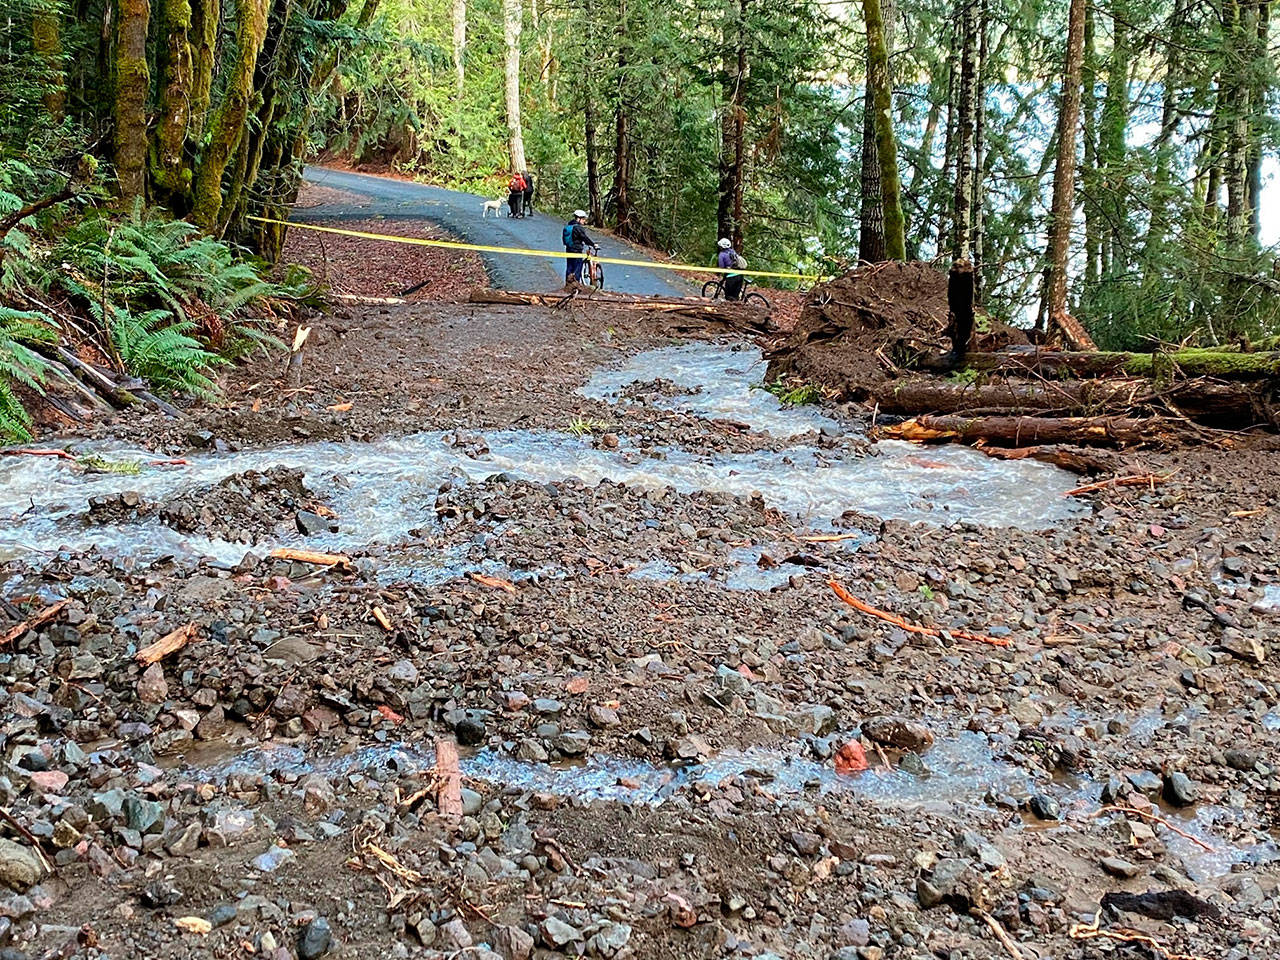 A washout blocks safe passage along the Spruce Railroad Trail. Olympic National Park officials noted the trail closure on Jan. 3, citing heavy rains as the cause of the landslide. Photos by Noel Carey